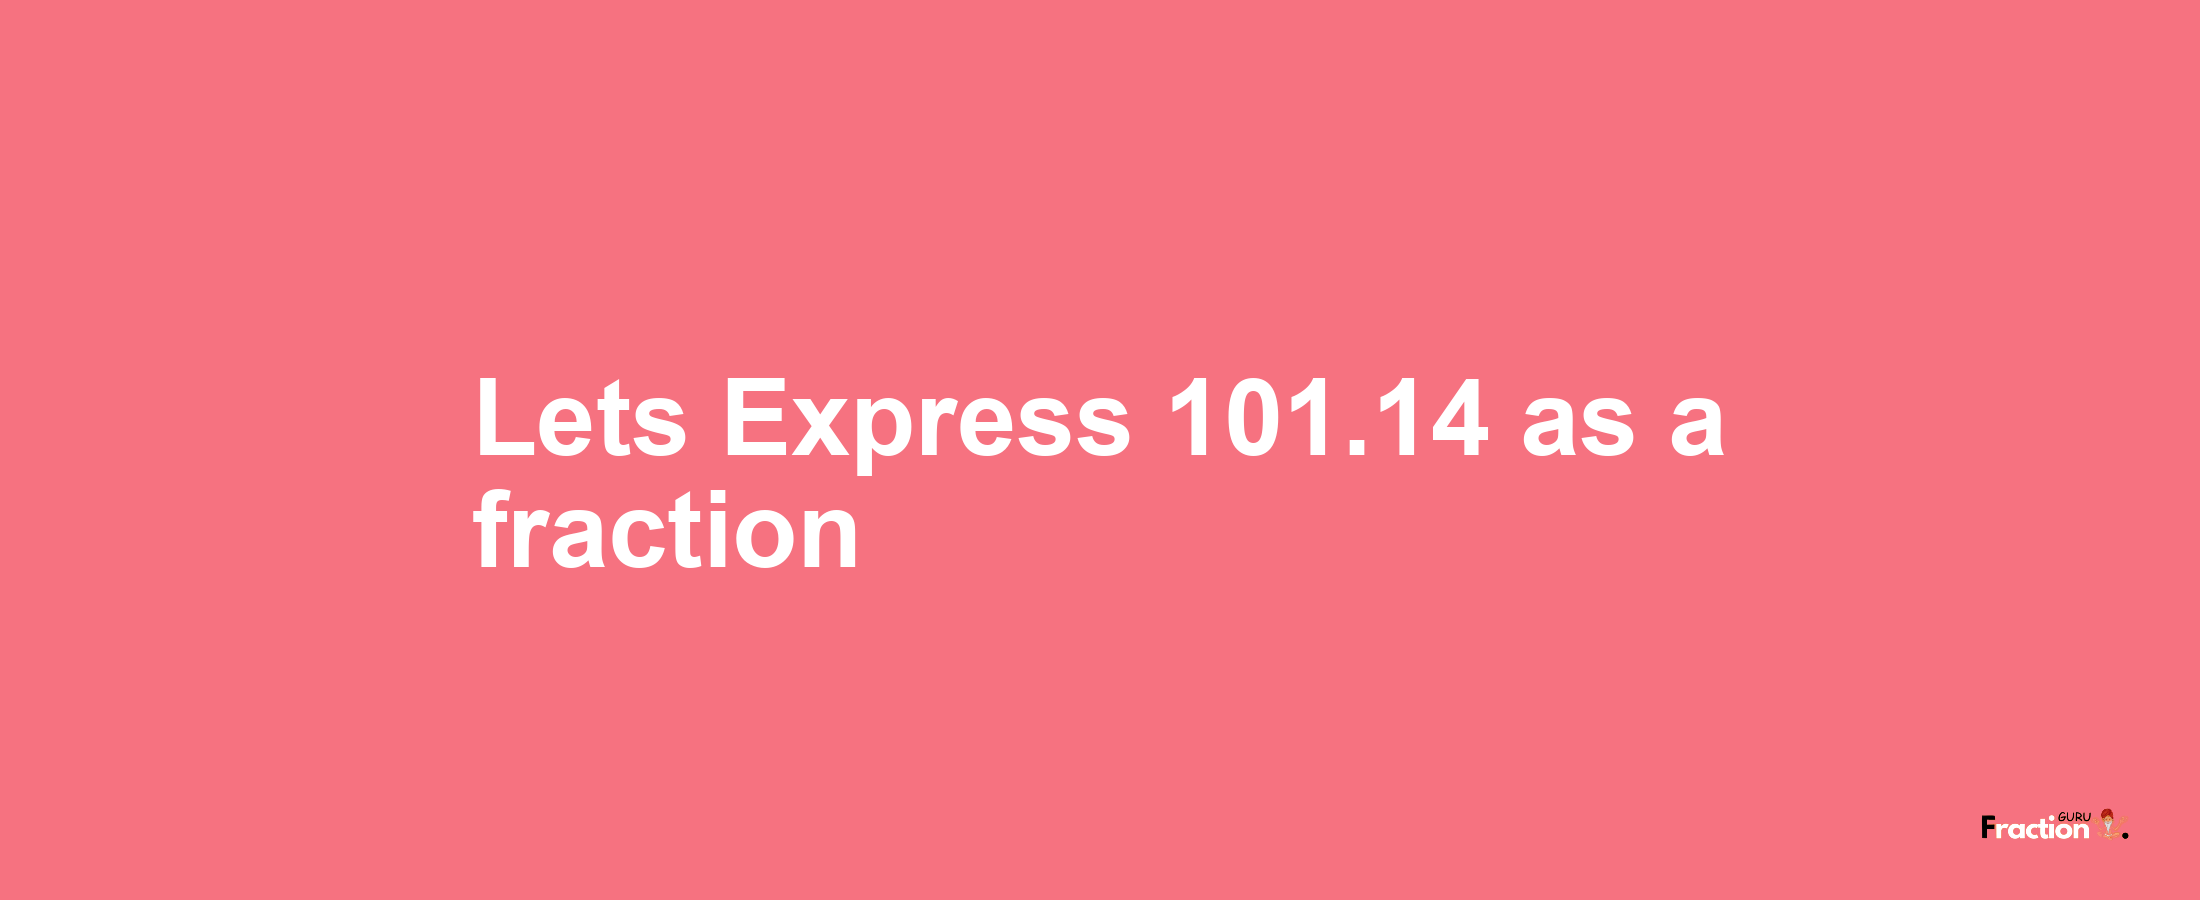 Lets Express 101.14 as afraction